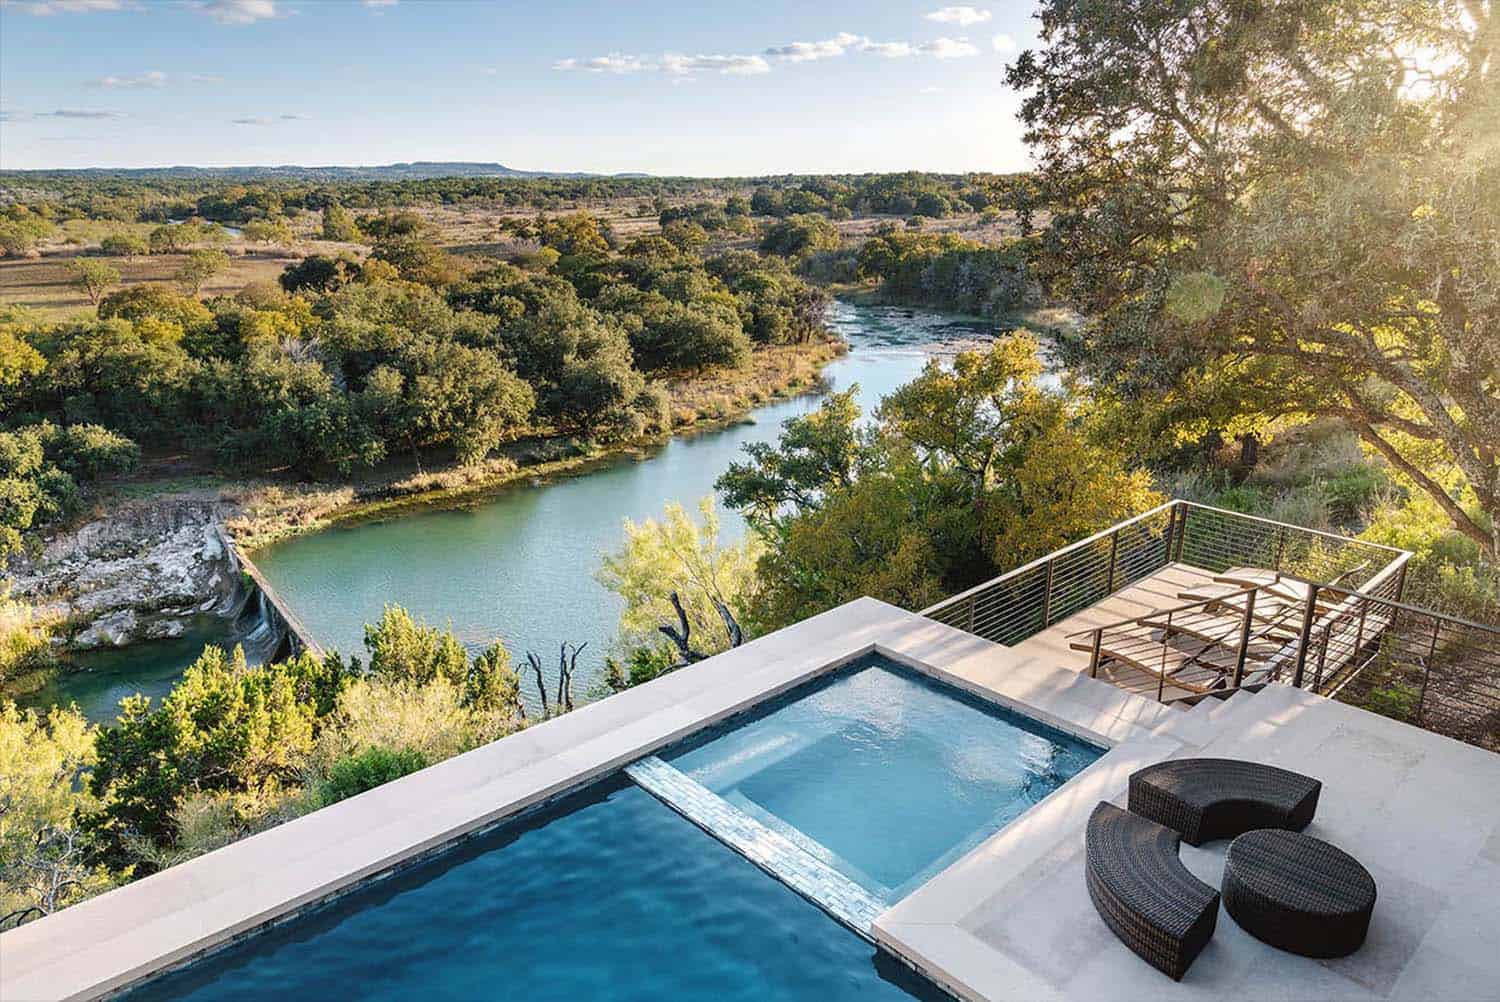 A modern ranch house in the Texas Hill Country floats over a rocky cliff